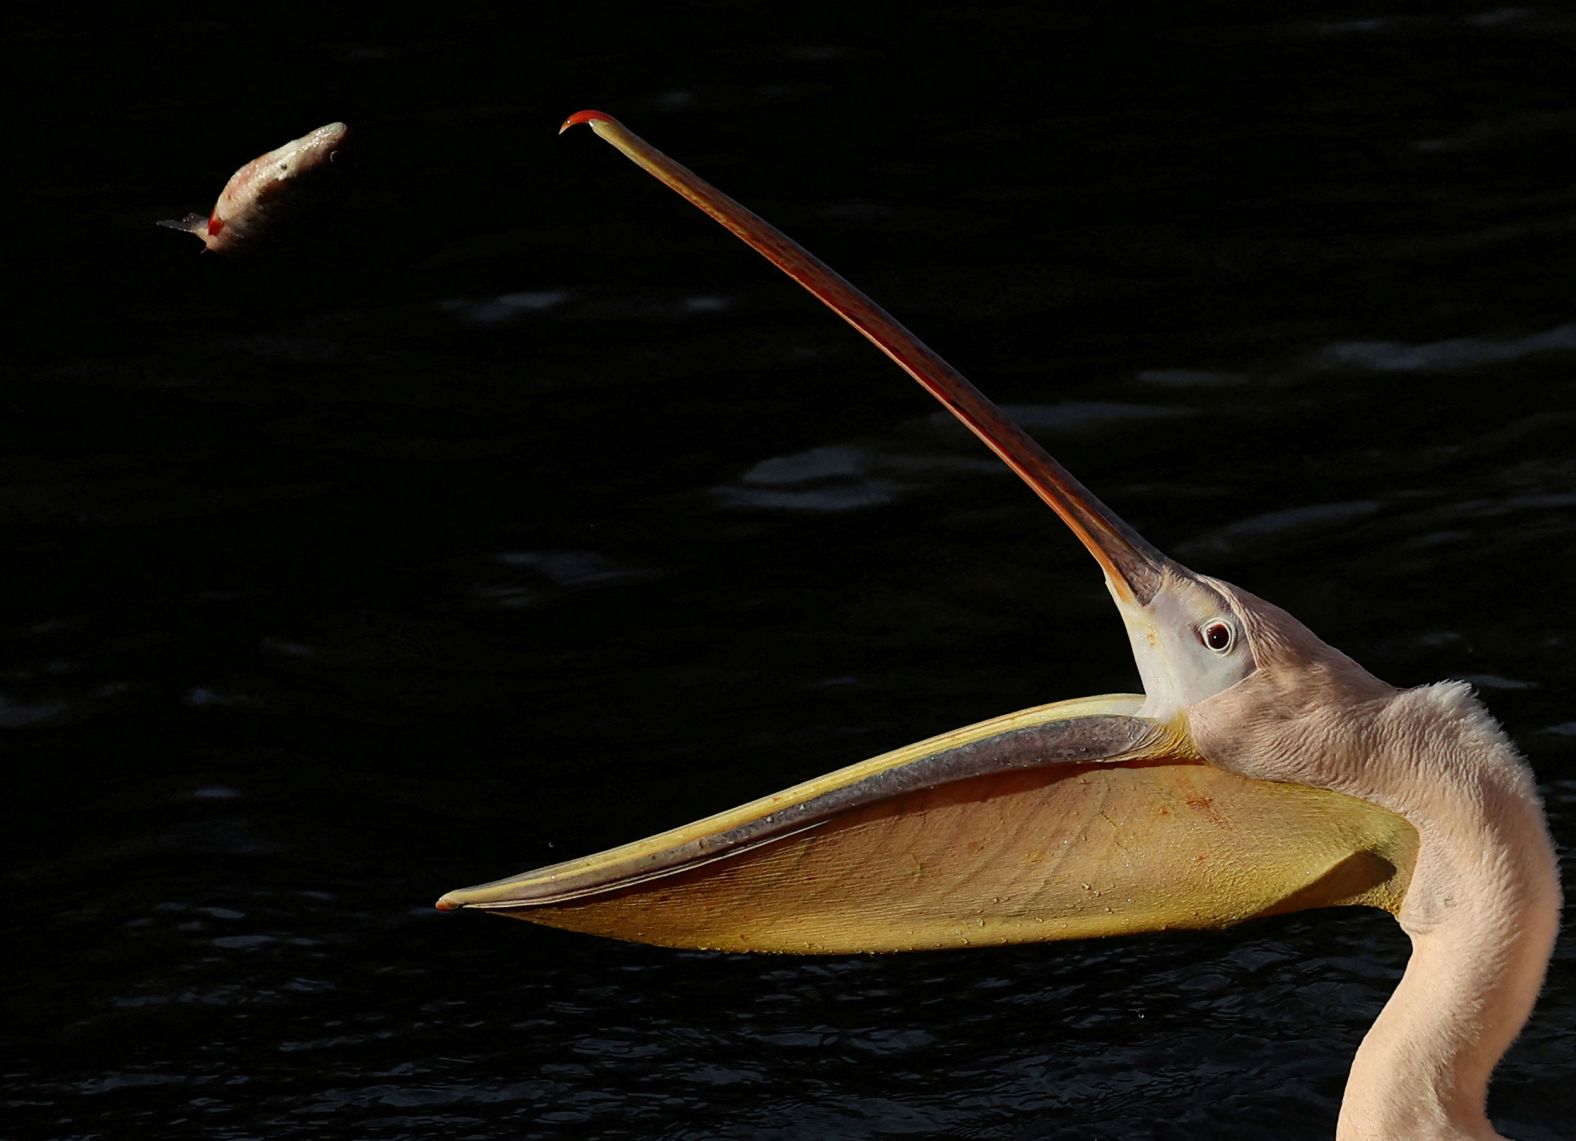 A pelican prepares to catch a fish at St James's Park in London on Friday, February 2.